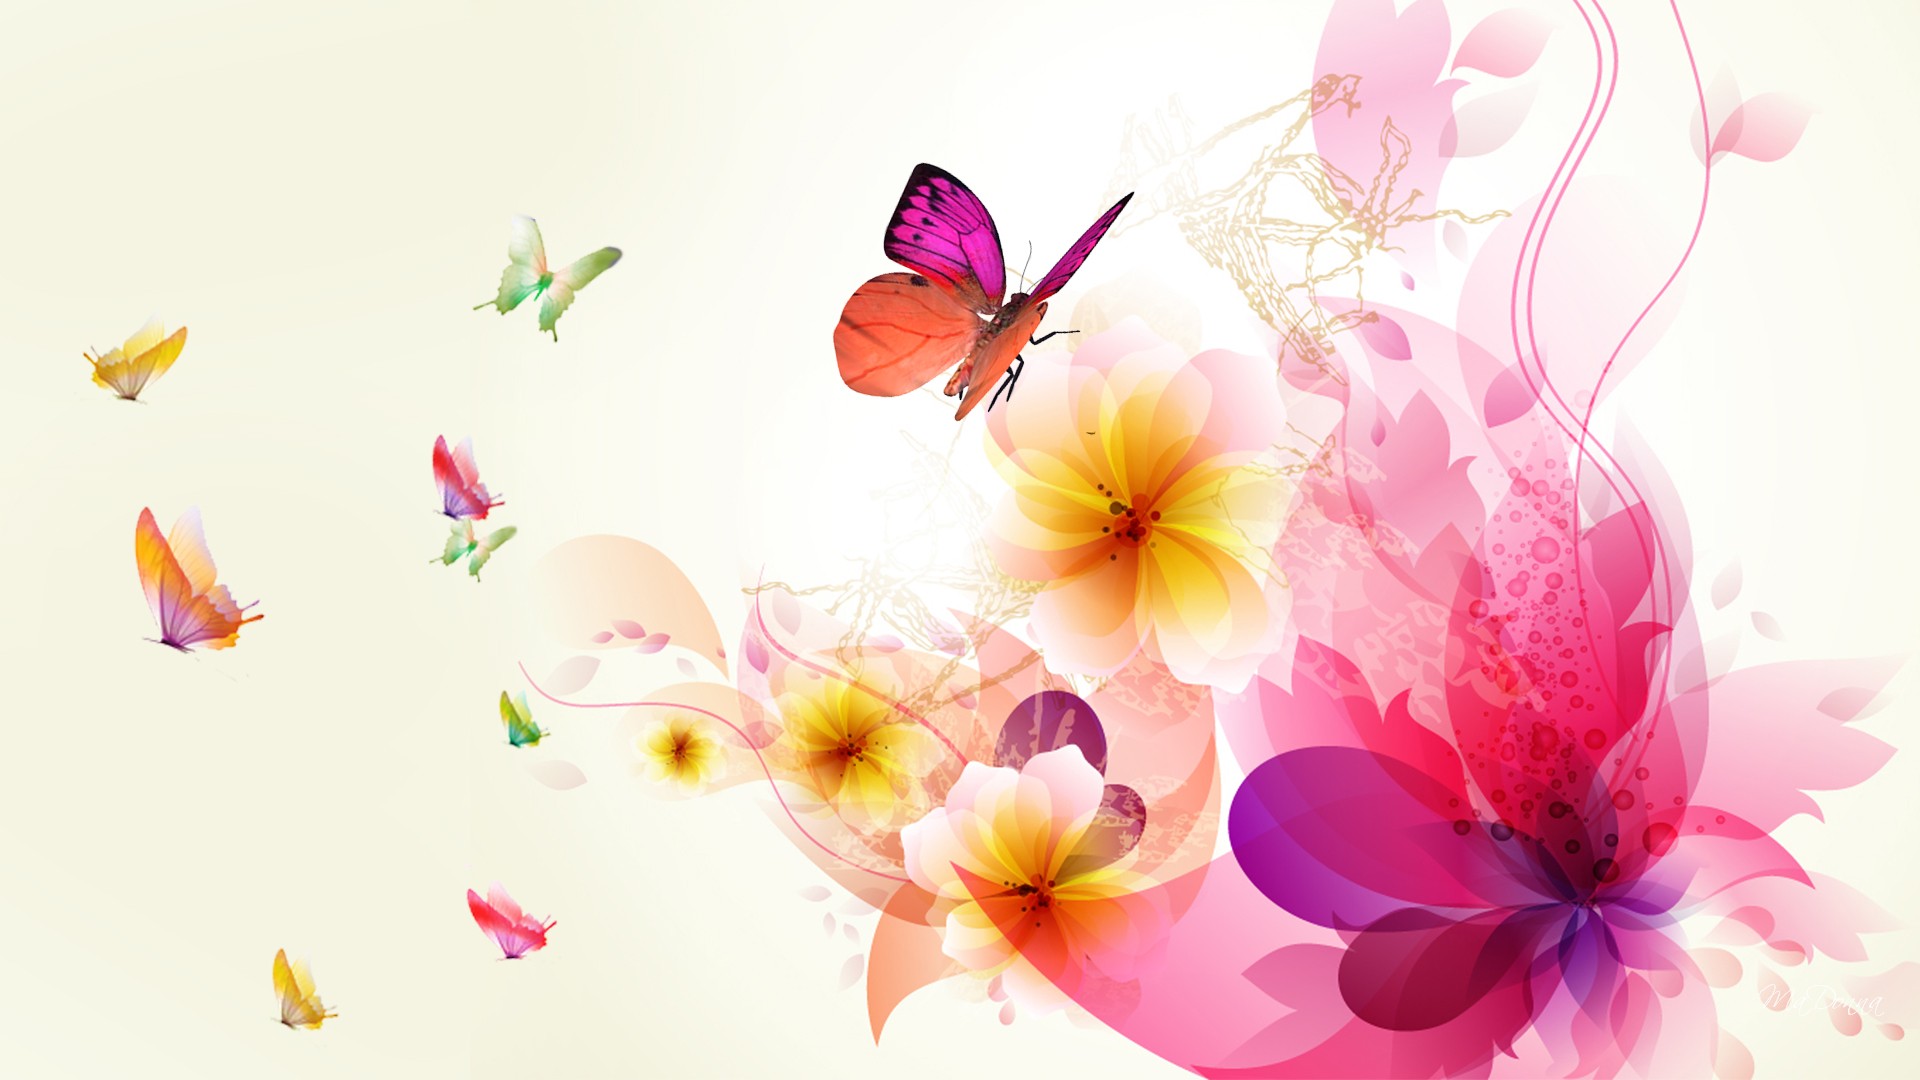 Abstract Flowers Wallpaper Which Is Under The